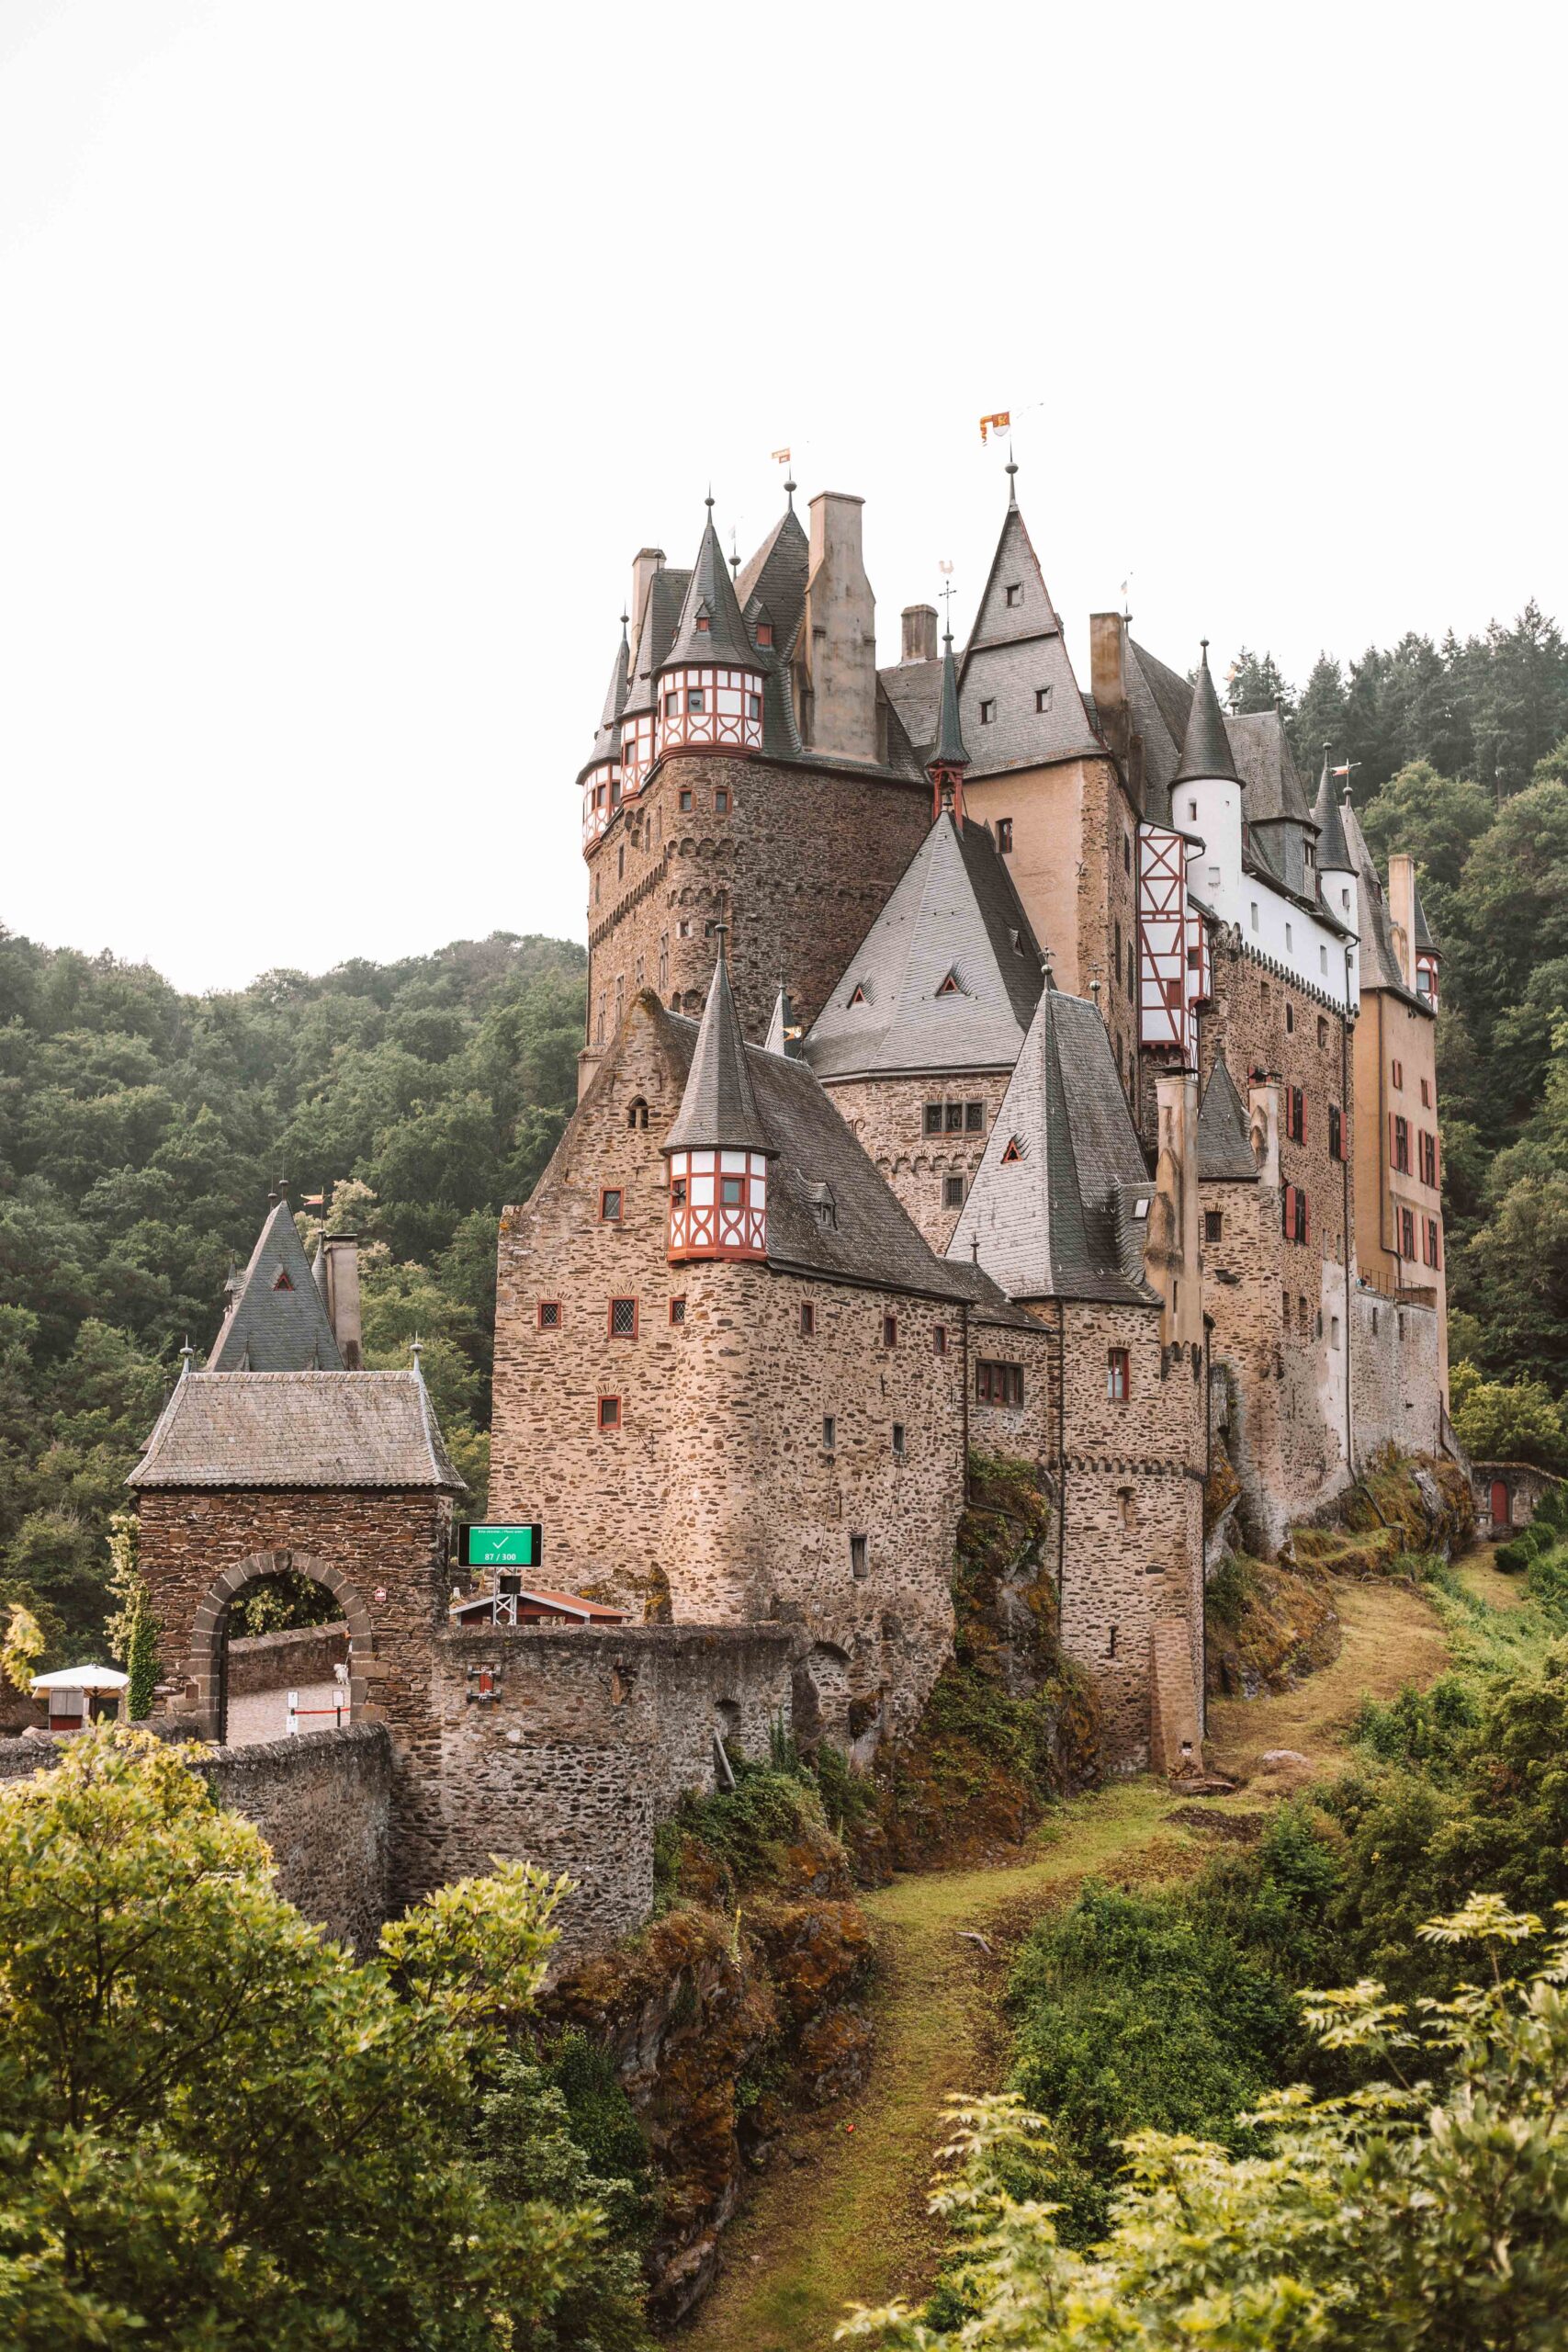 A Complete Guide To Visiting Burg Eltz, Germany’s Fairytale Castle